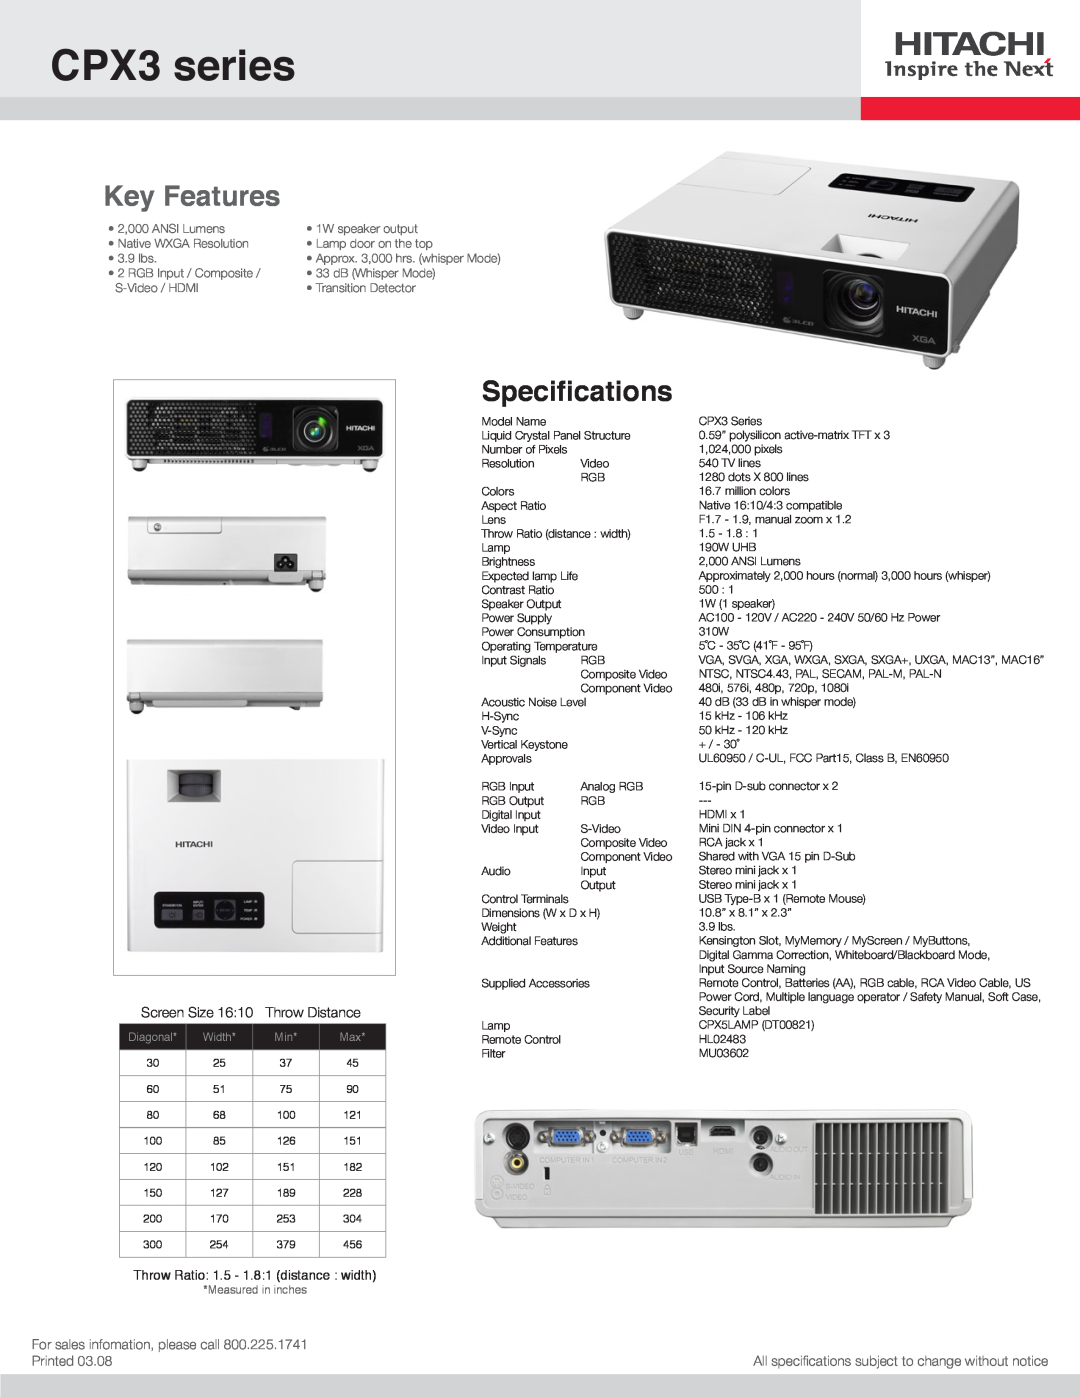 Hitachi specifications CPX3 series, Key Features, Specifications, Screen Size, Throw Distance, Printed, Diagonal, Width 